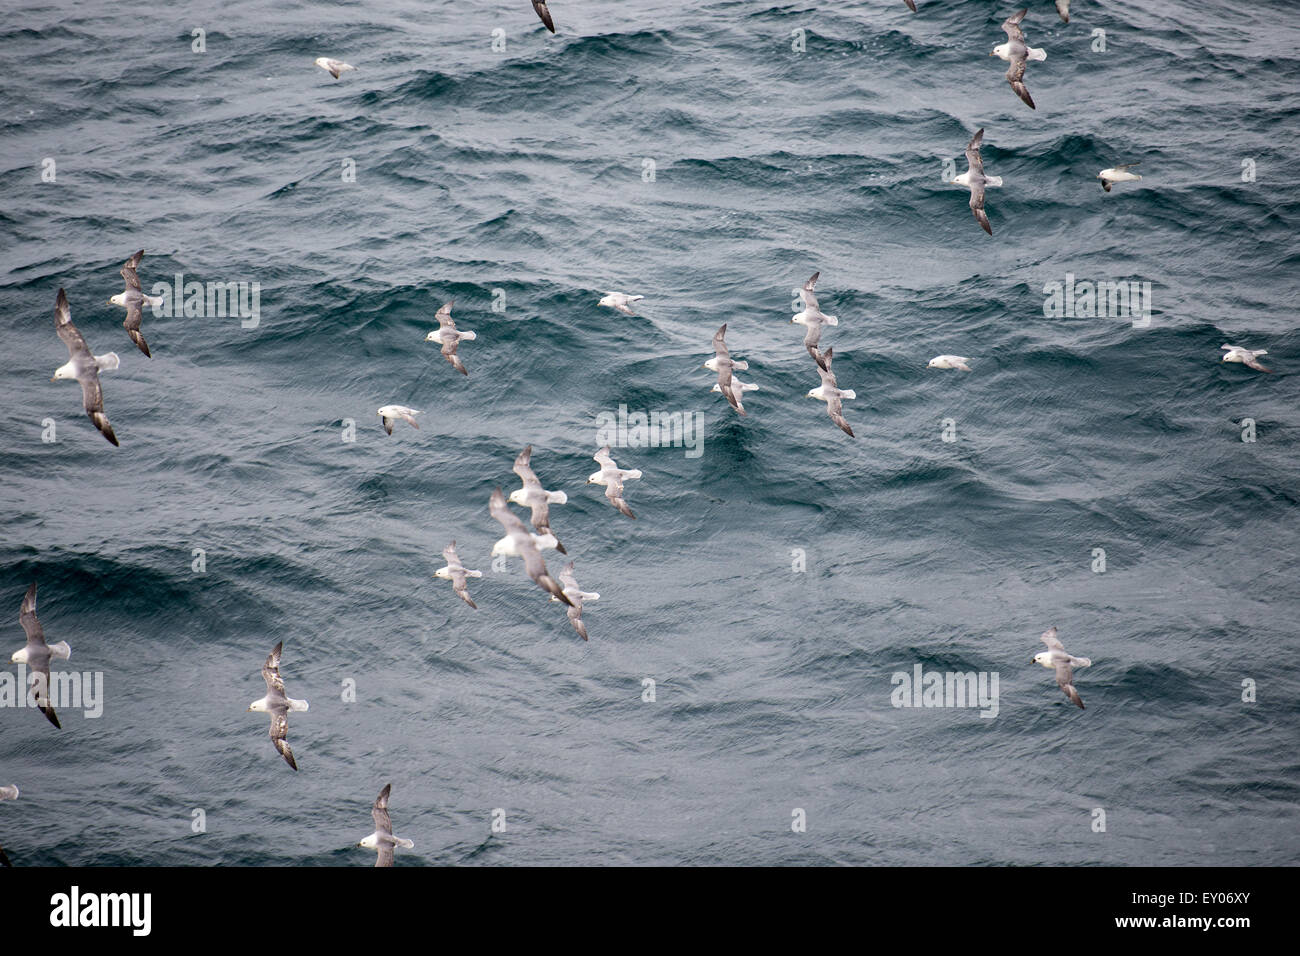 A flock of Northern fulmars, Fulmarus glacialis, flying over water Stock Photo